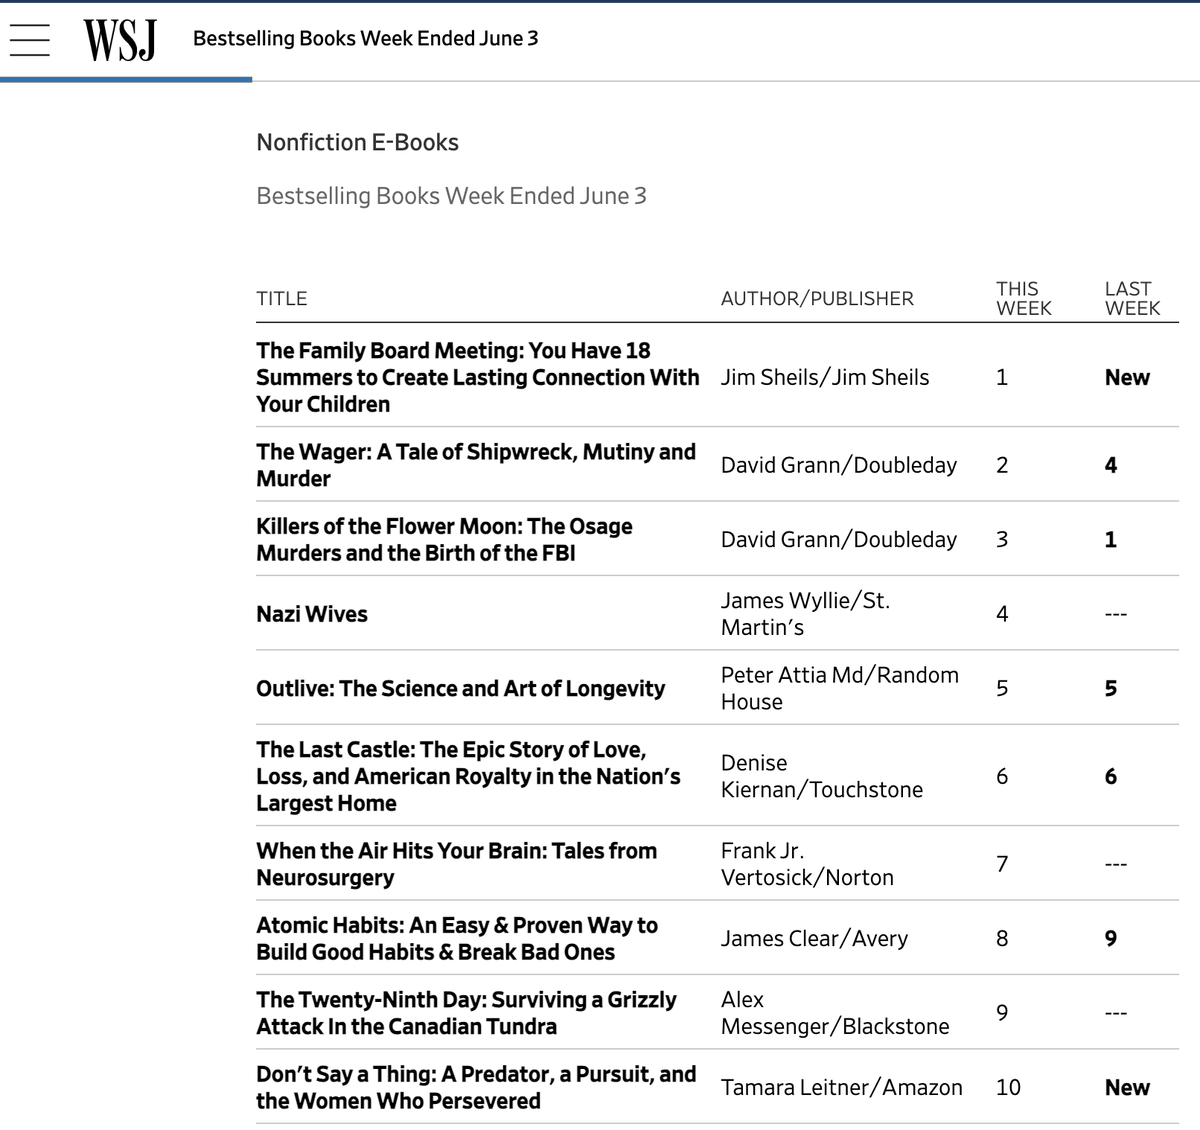 I just found out that my book made the @WSJ TOP 10 list for New Nonfiction E-books! I'm so incredibly grateful to the the survivors who shared their stories & to all of you who supported me on this journey. WOW! #Humbled Thank you. 💙 #DontSayaThing